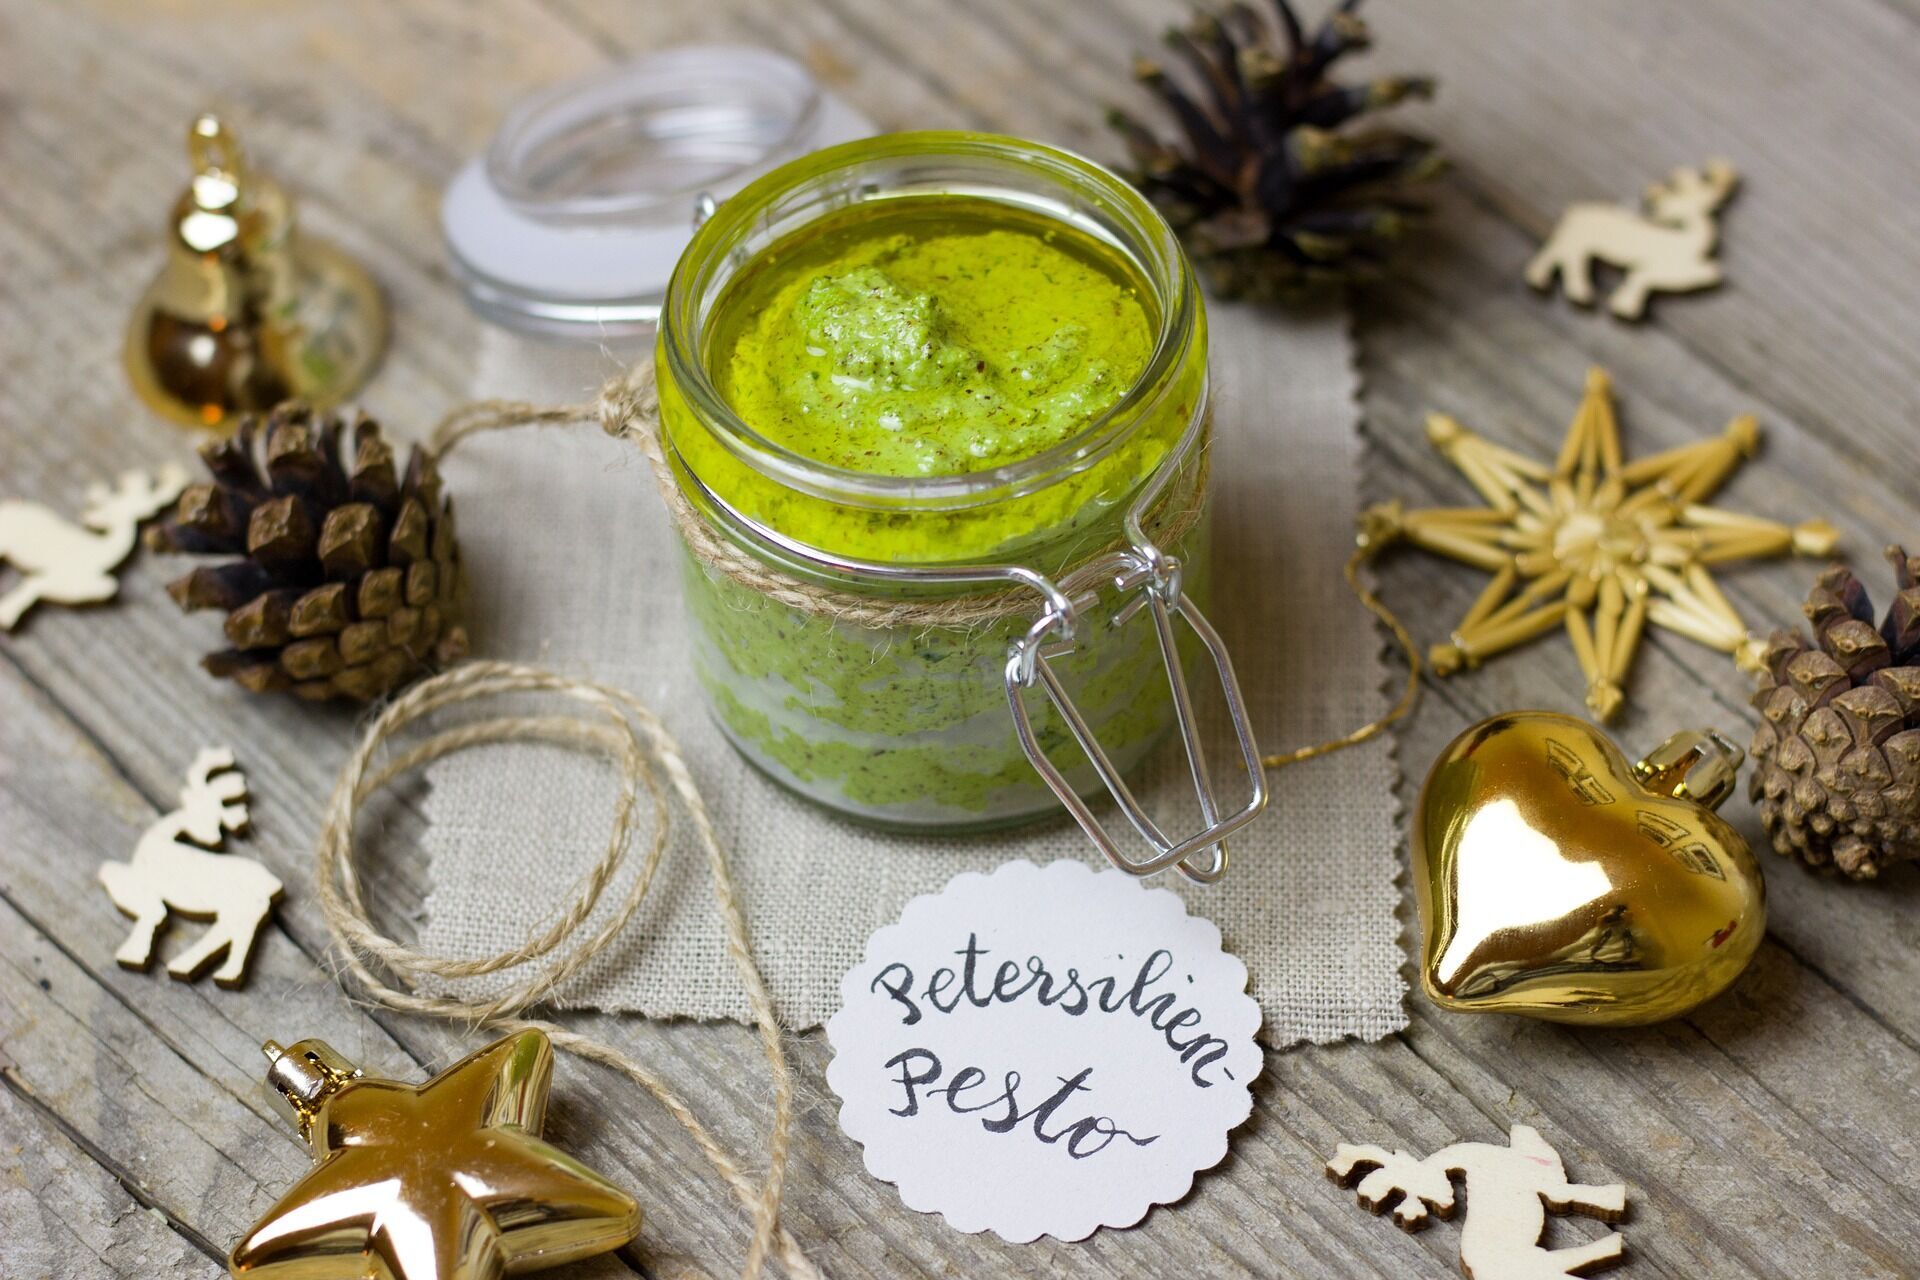 Pesto sauce without nuts